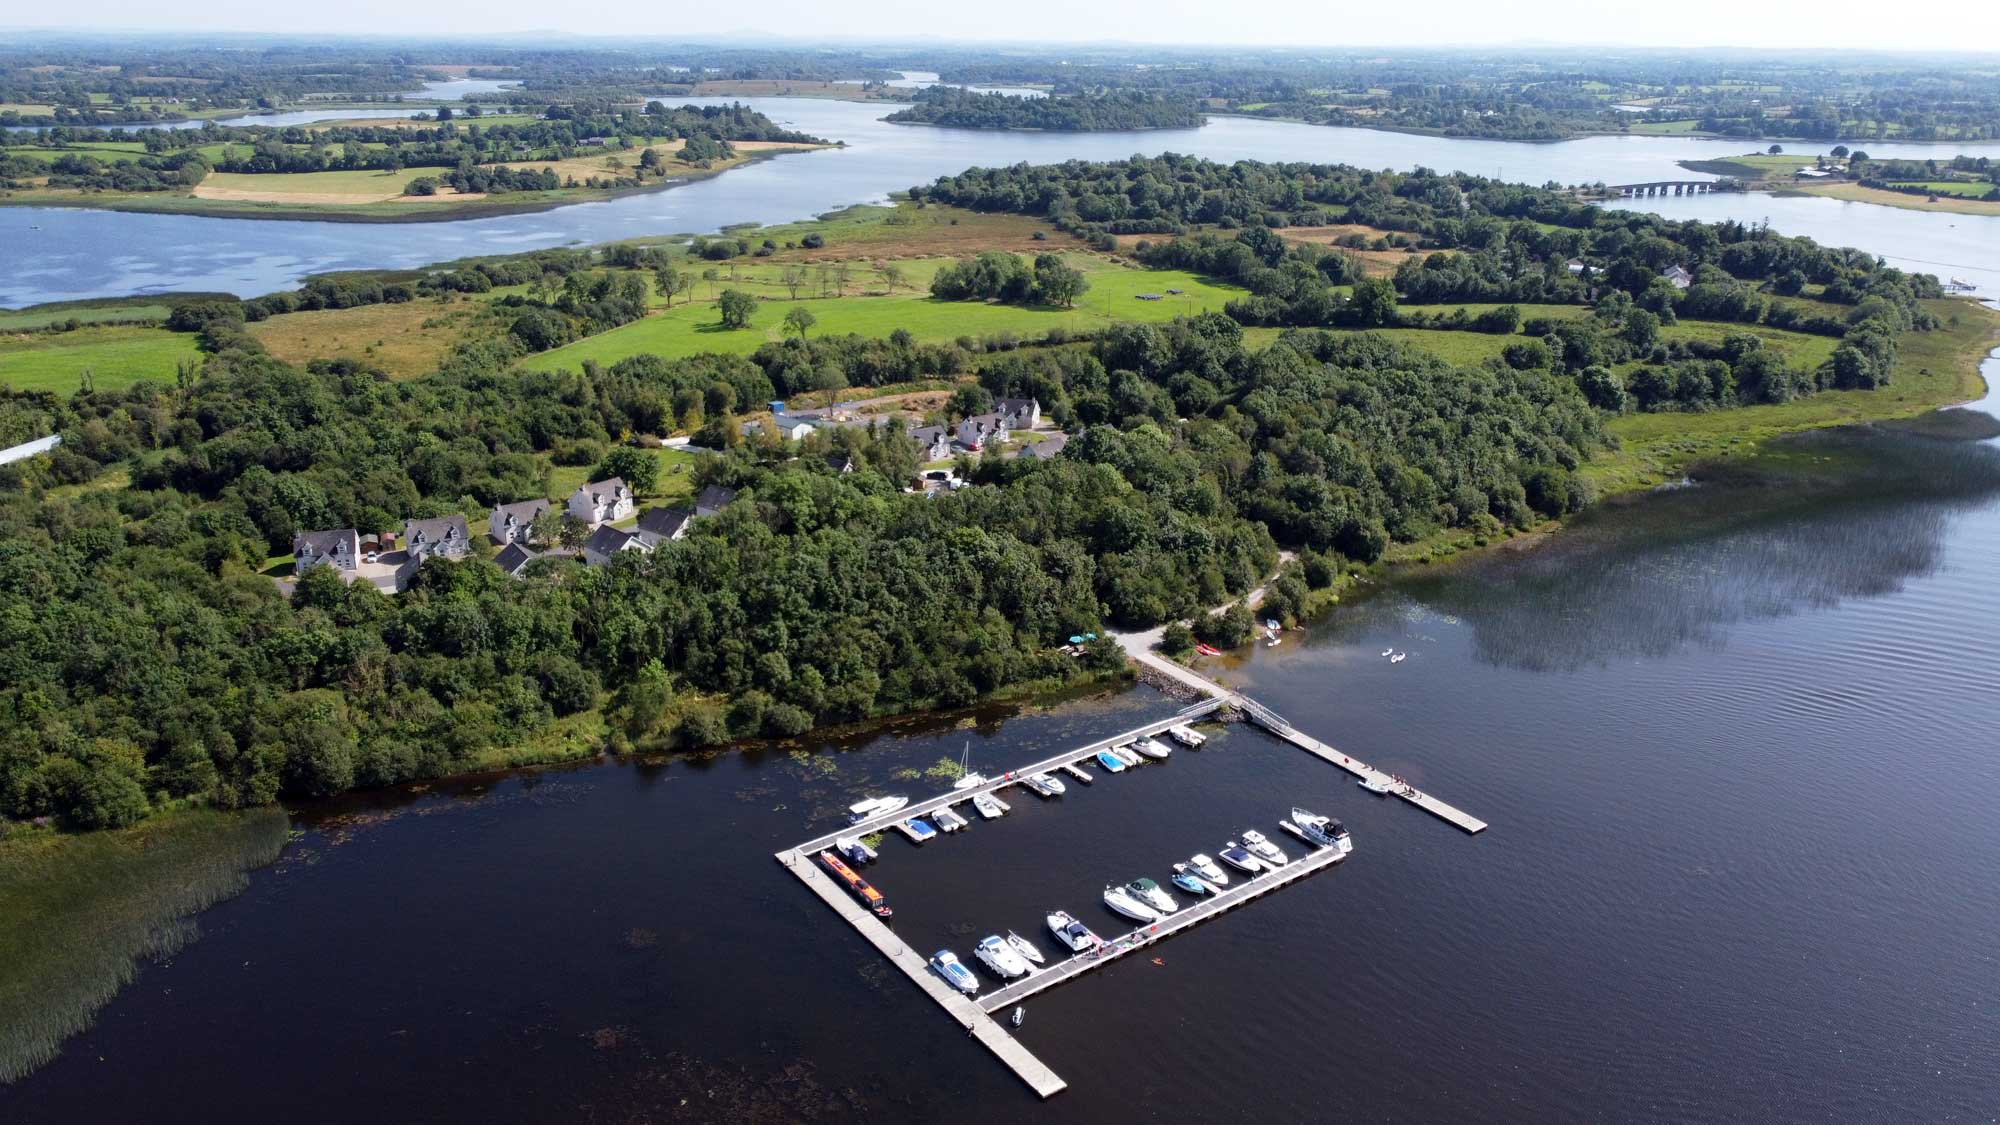 Fermanagh Lodges : Self Catering Cottages, Lodges, Apartments with waterbased Activities and Marina on site